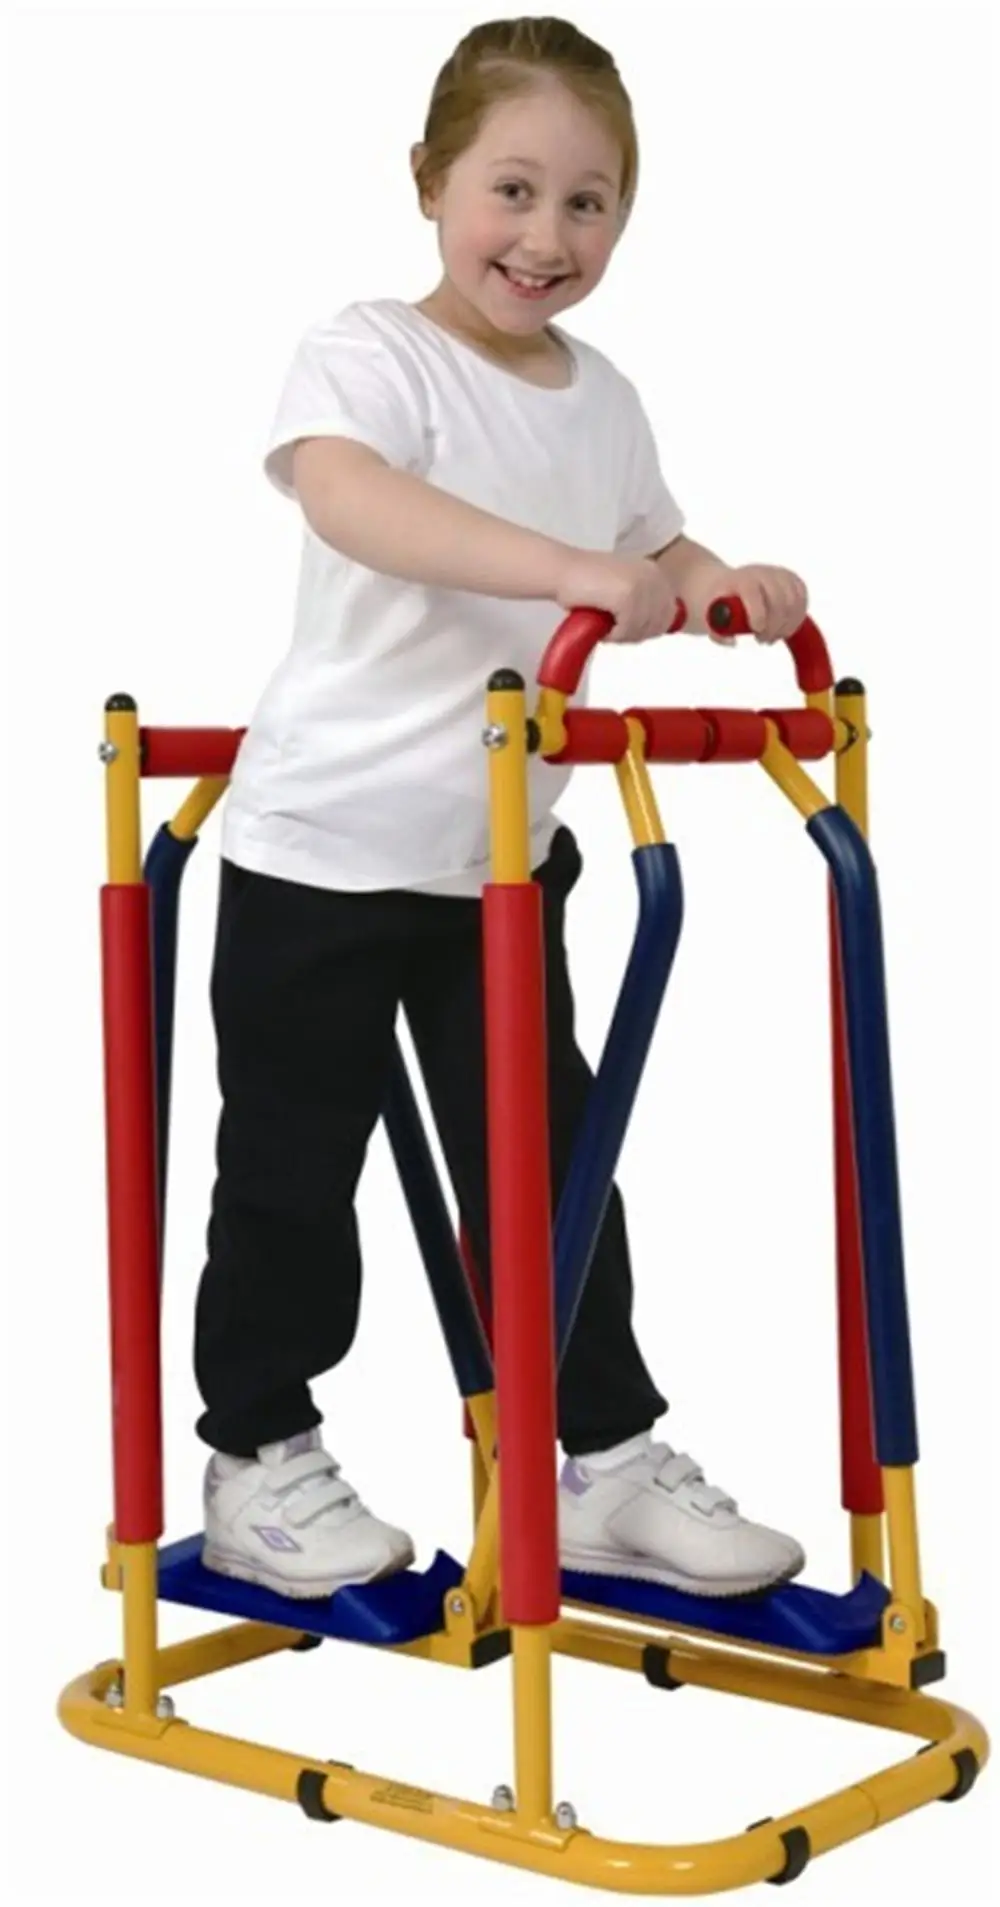 2018 New Products Kids Gym Fitness Equipment For Sale Qx-18091l - Buy